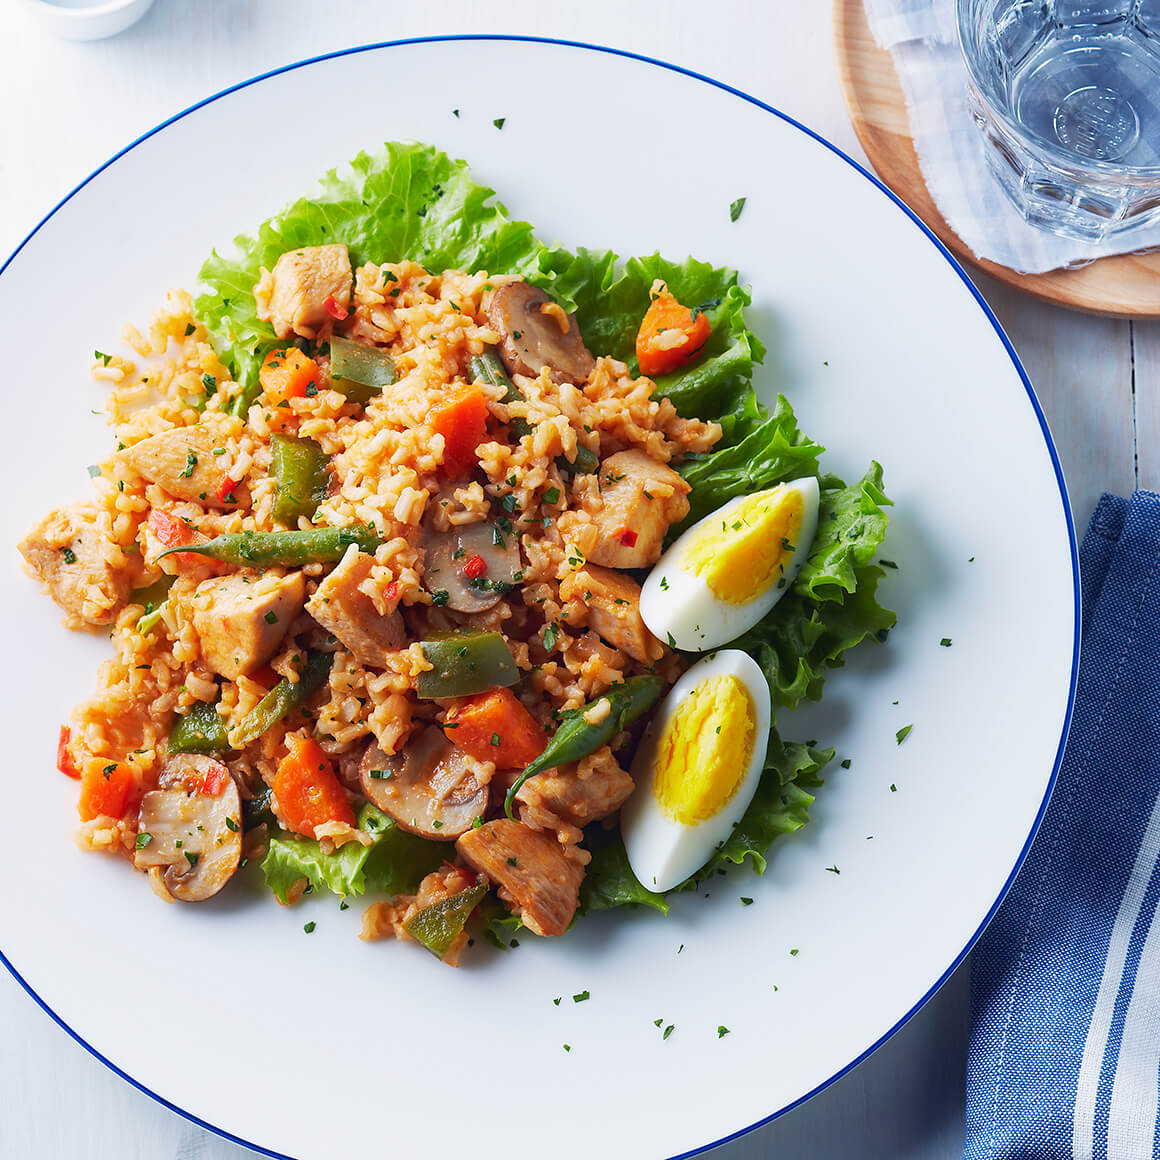 How To Cook Jollof Rice With Egg Or Boiled Egg : Egg Pulao Recipe Anda Pulao Yummy Indian Kitchen : When the eggs reach the desired cooking time, use tongs to remove the eggs from the hot water and immerse gently into the prepared ice water to cool, about 10 minutes.